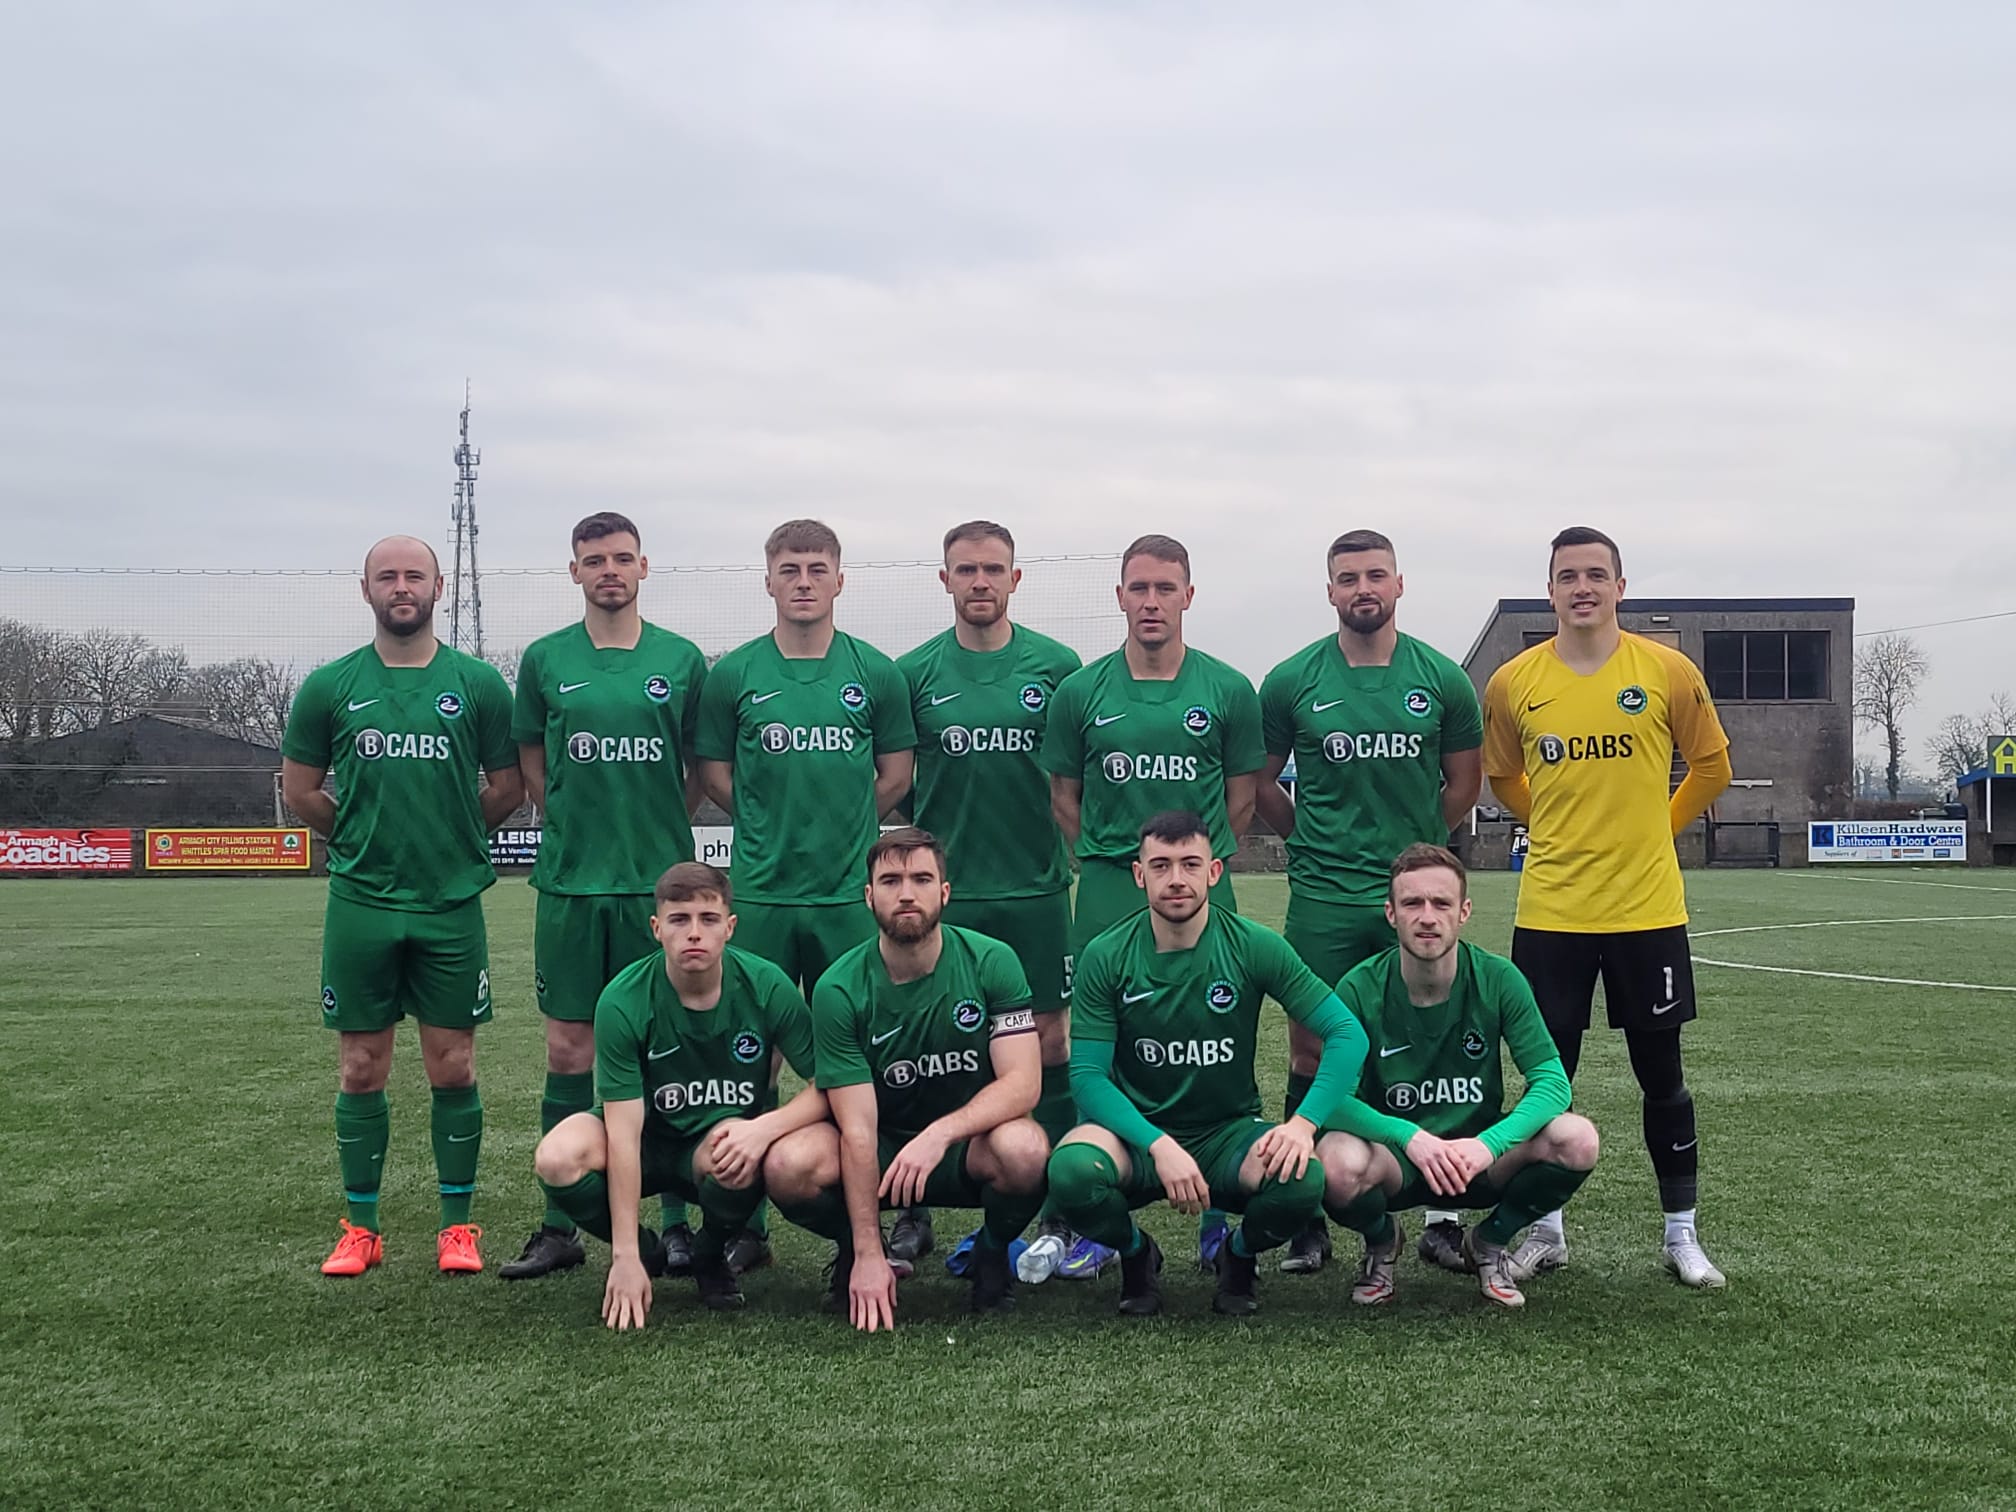 Newington suffered a 2-1 defeat to Armagh City at Holm Park on Saturday afternoon as they slipped to third in the Premier Intermediate League table 